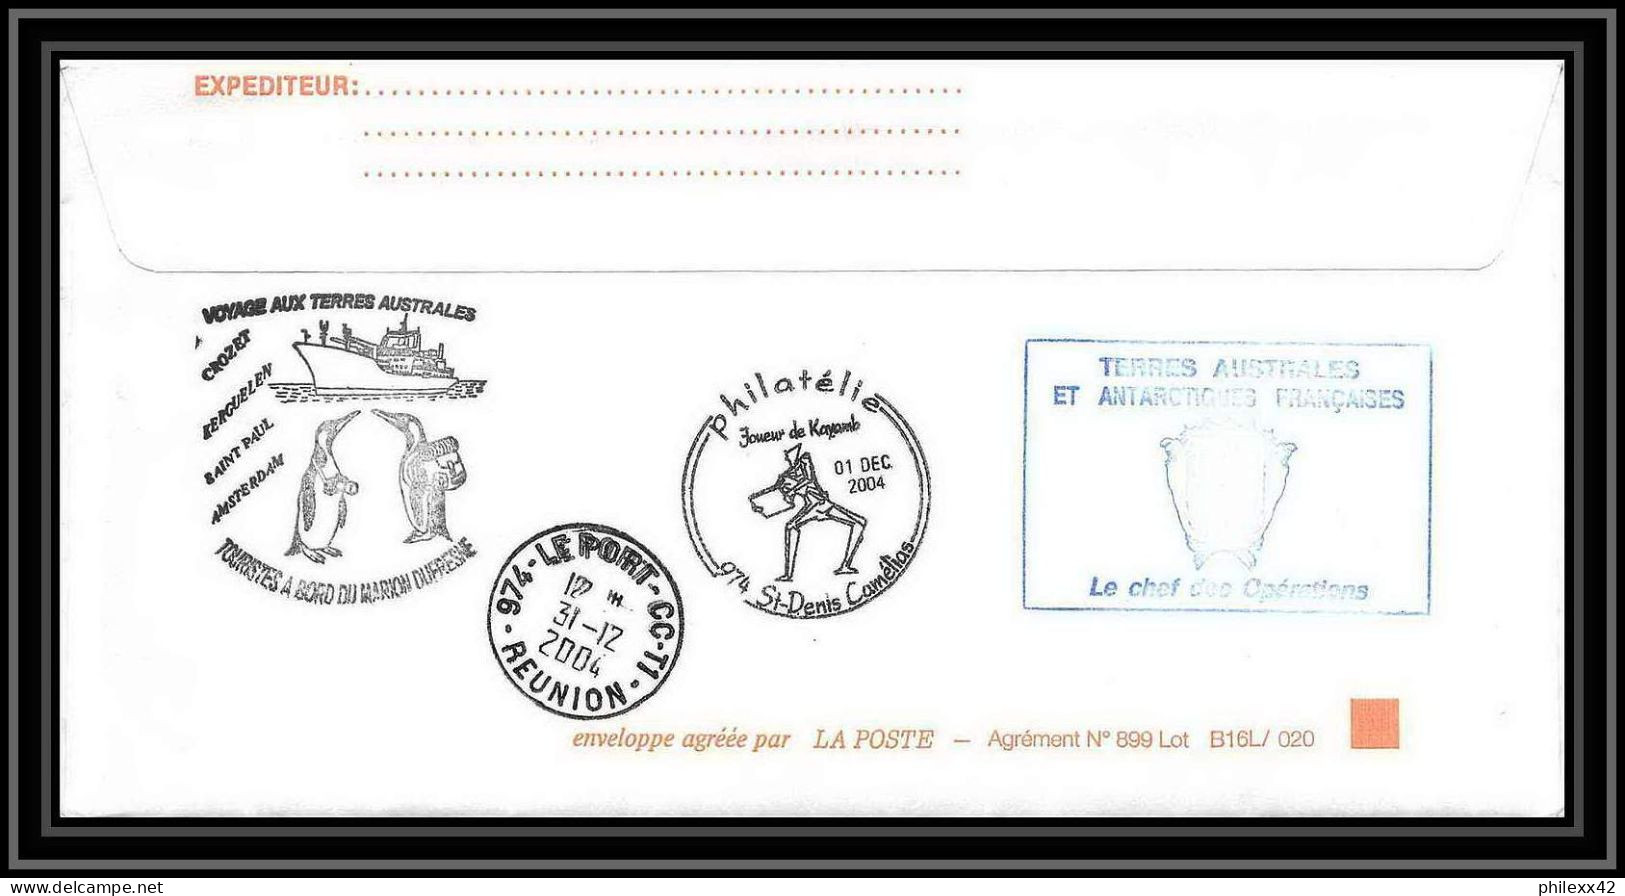 2483 ANTARCTIC Terres Australes TAAF Lettre Cover Dufresne 2 Signé Signed OP 2004/4 N°392 21/12/2004 Helilagon - Helikopters